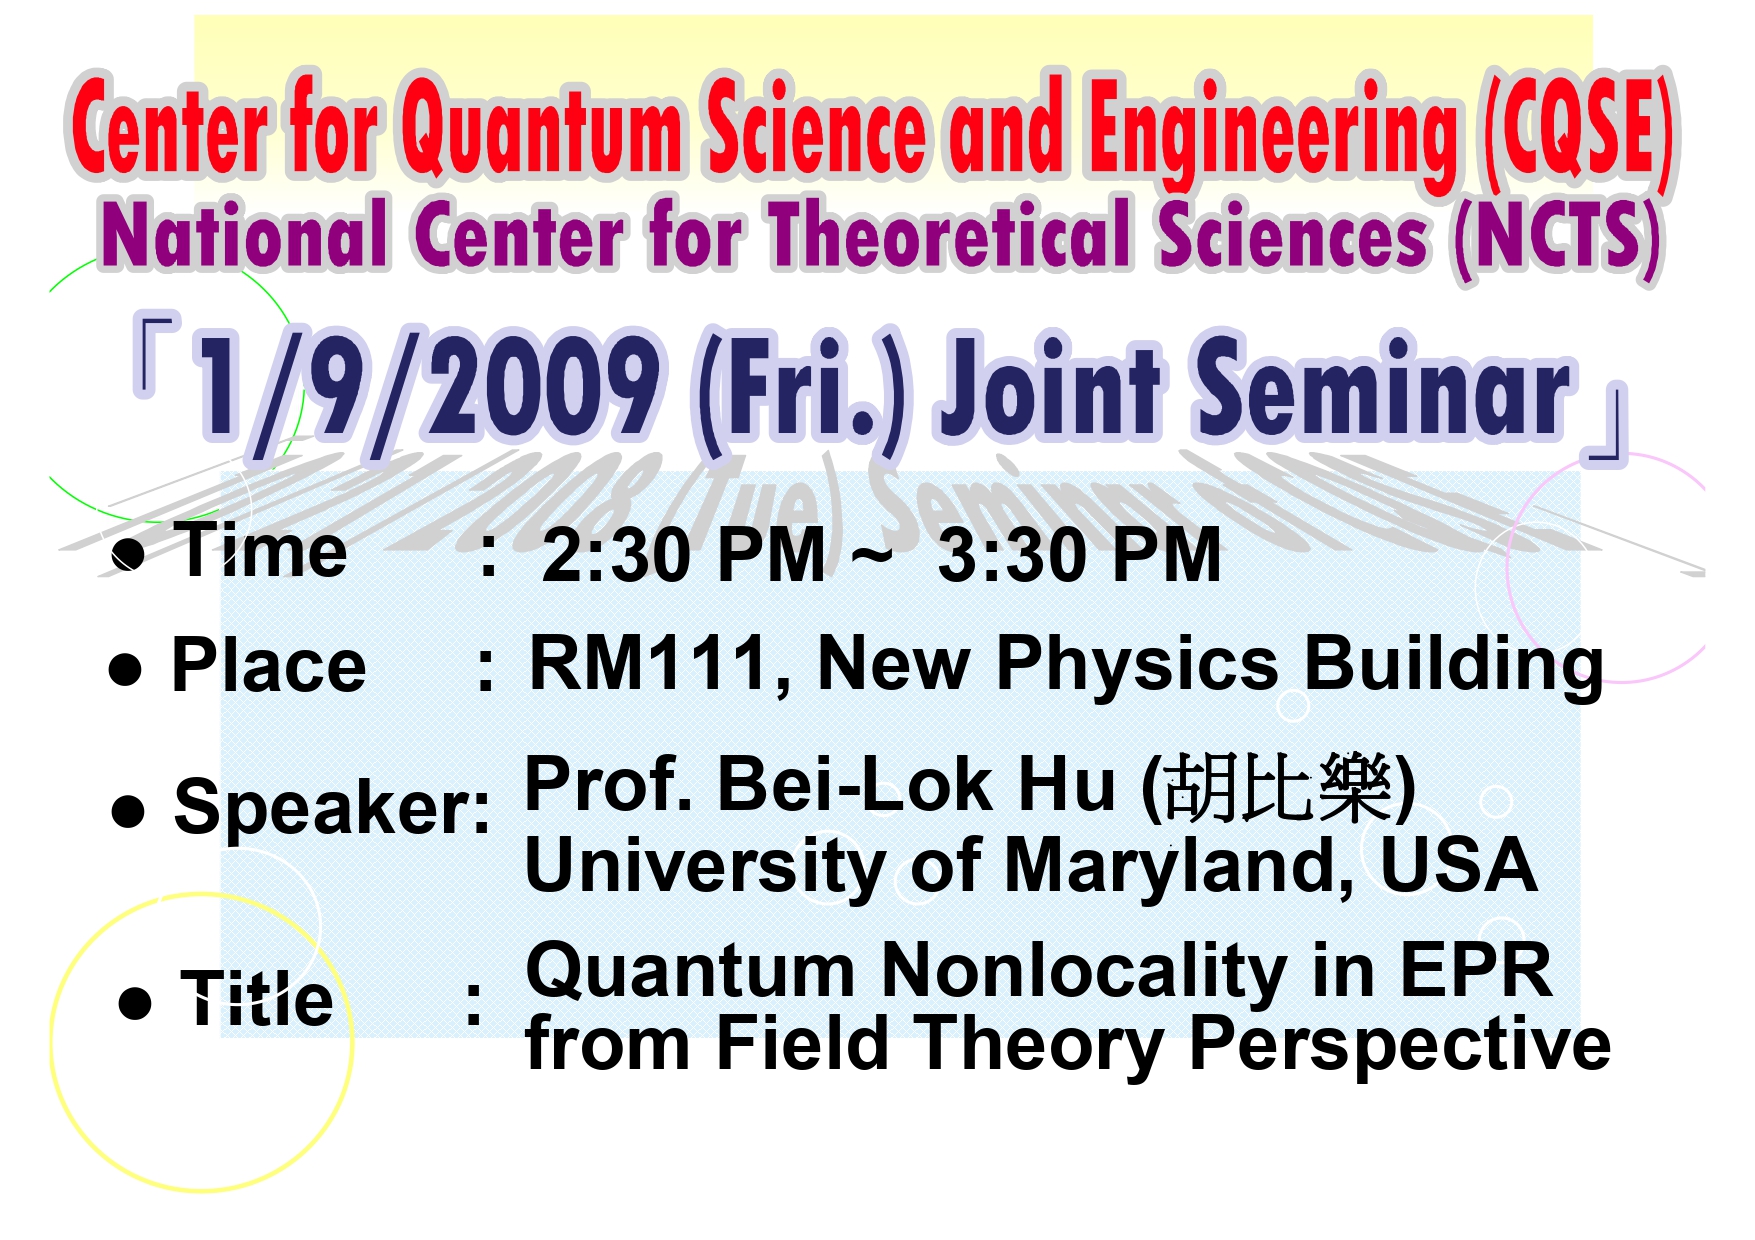 Joint Seminar of Center for Quantum Science and Engineering (CQSE) and National Center for Theoretical Sciences (NCTS)